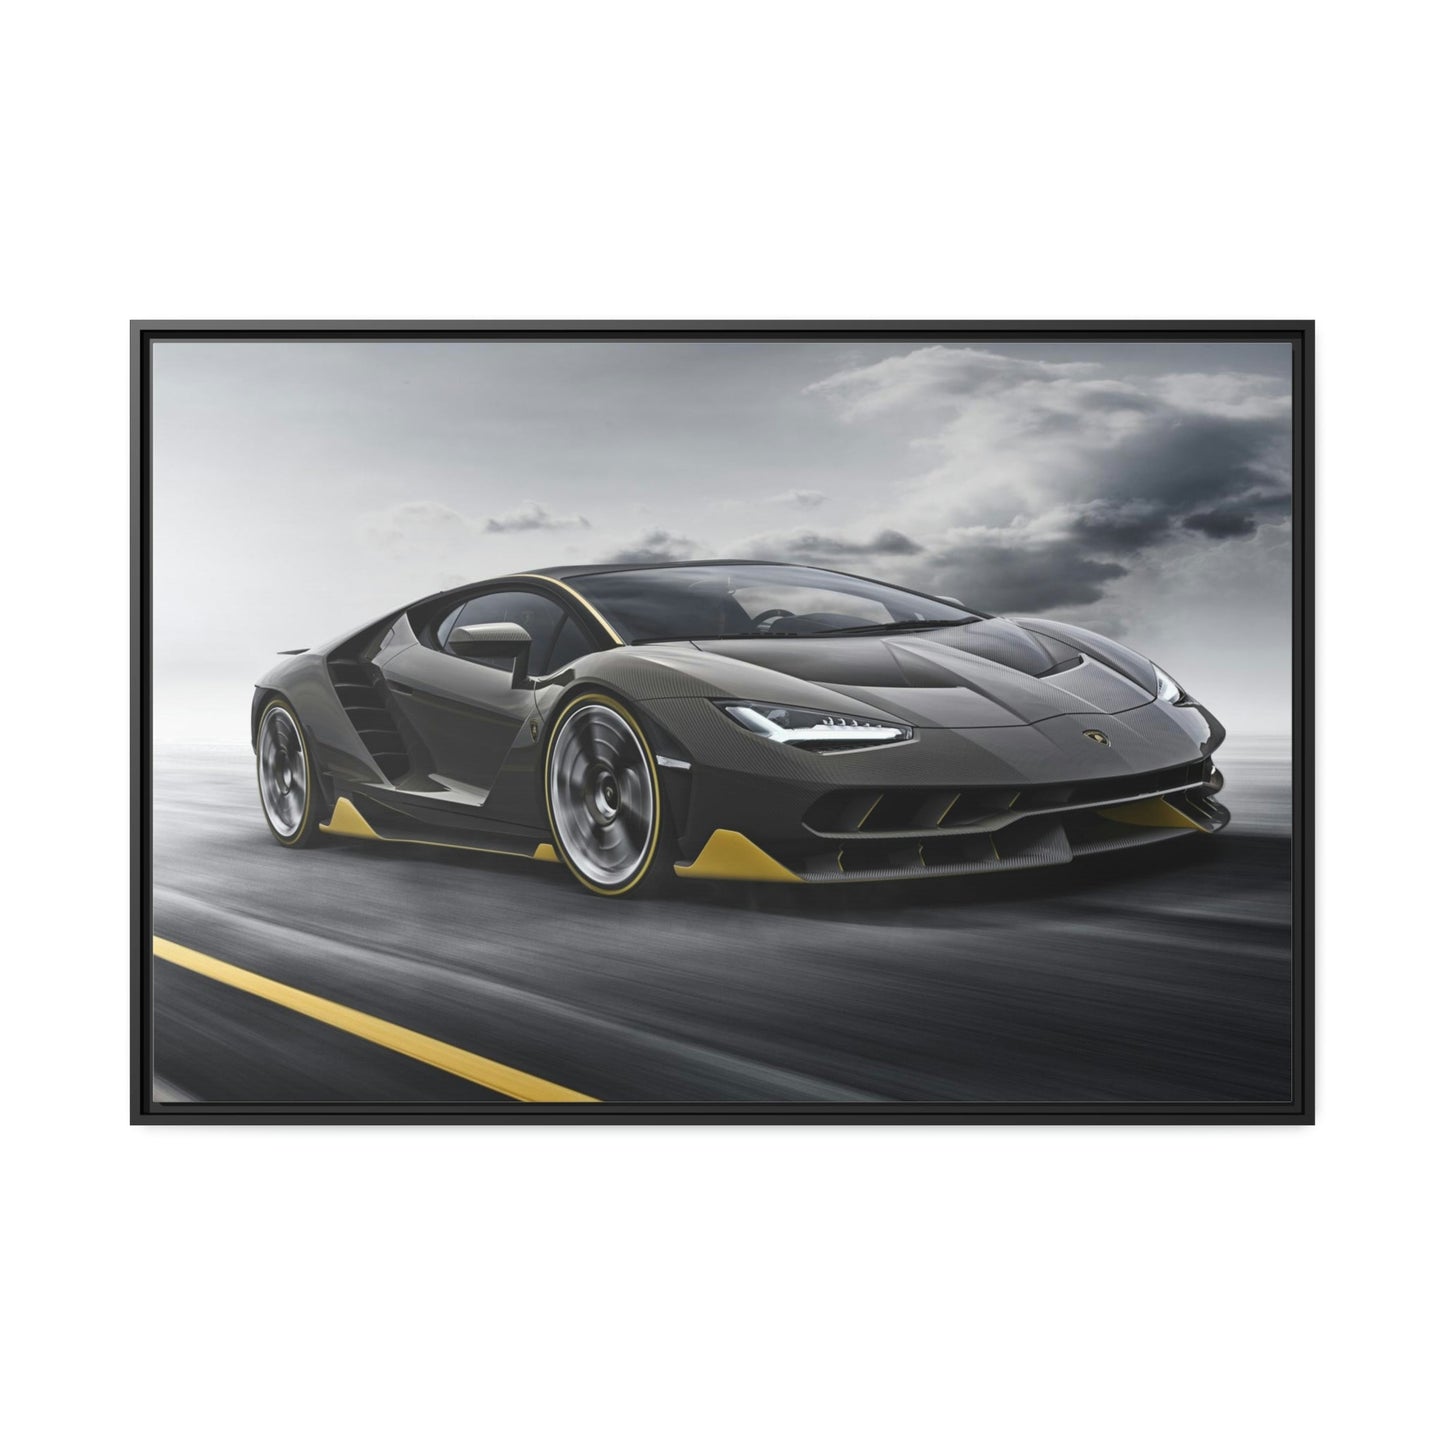 Italian Engineering Masterpiece: Canvas & Poster of a Lamborghini on High-Quality Print